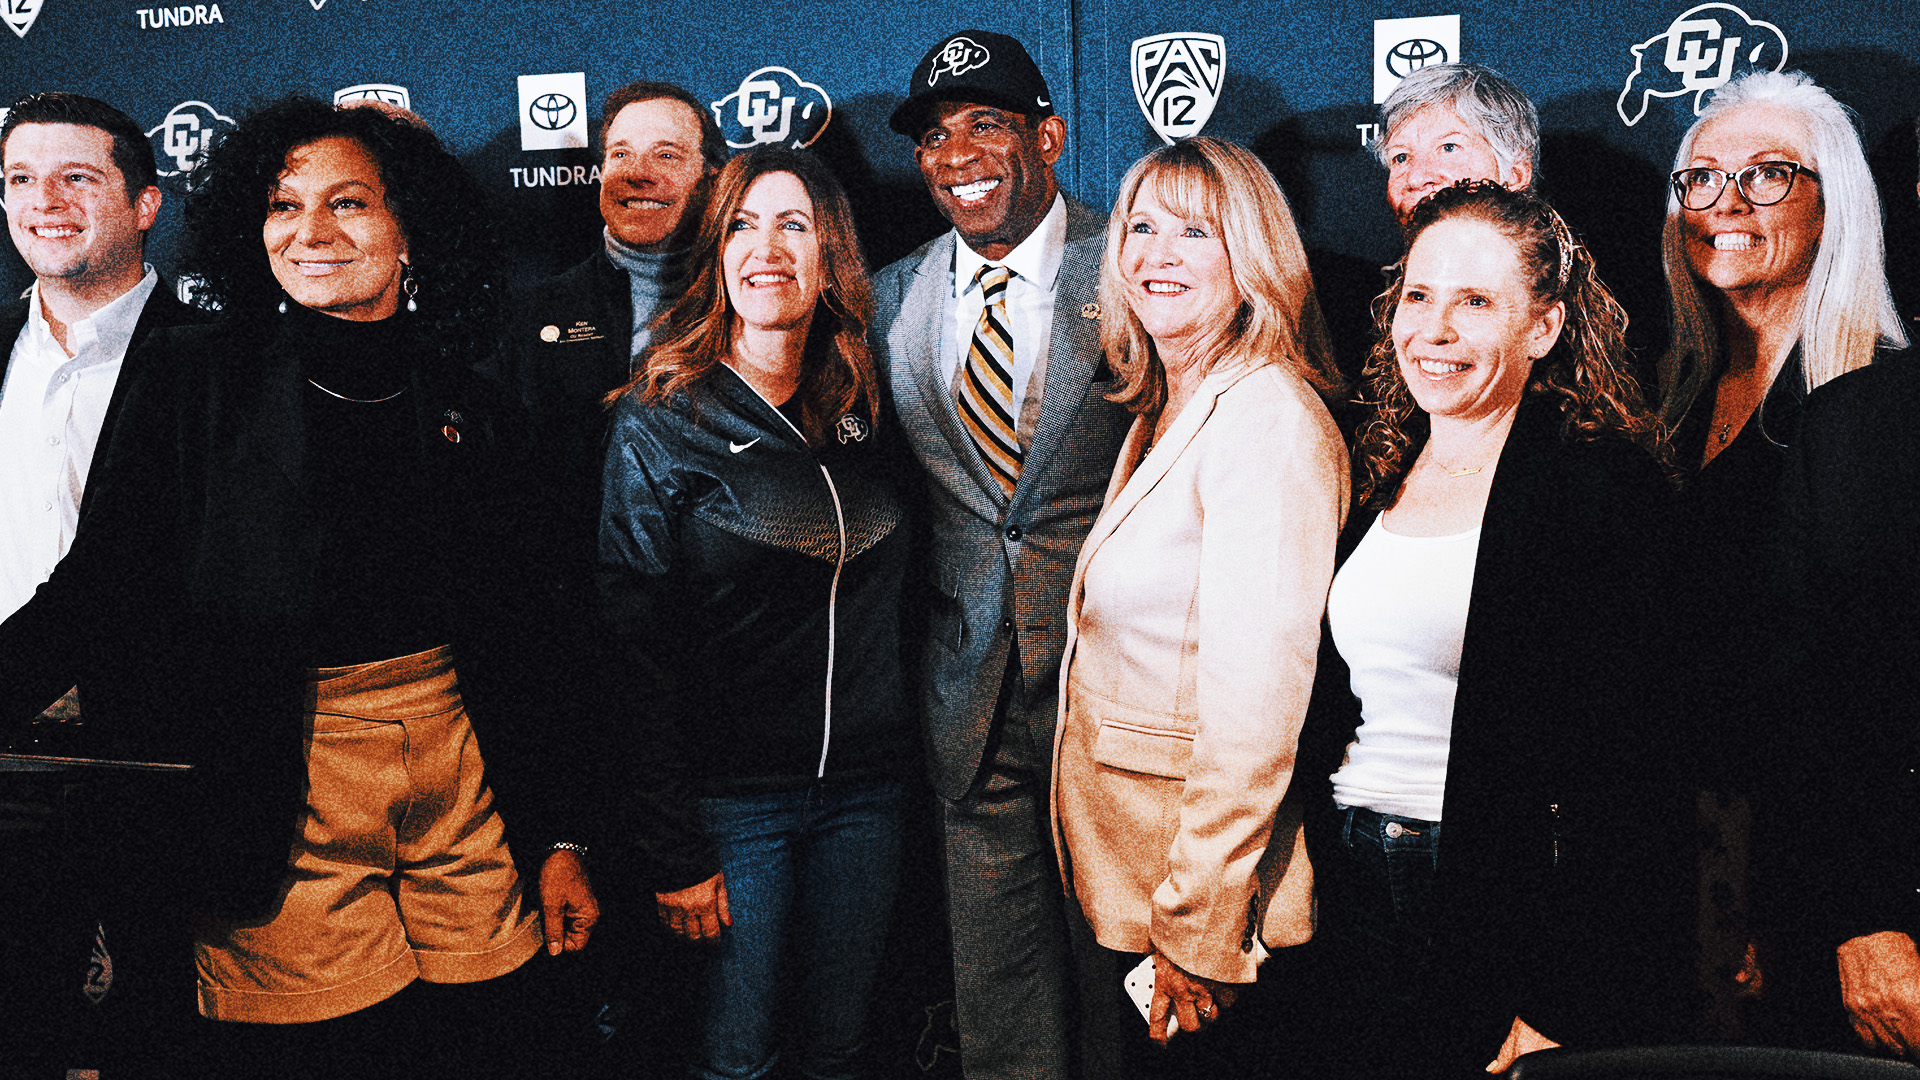 Fans give Deion Sanders standing ovation, chants at Colorado basketball game